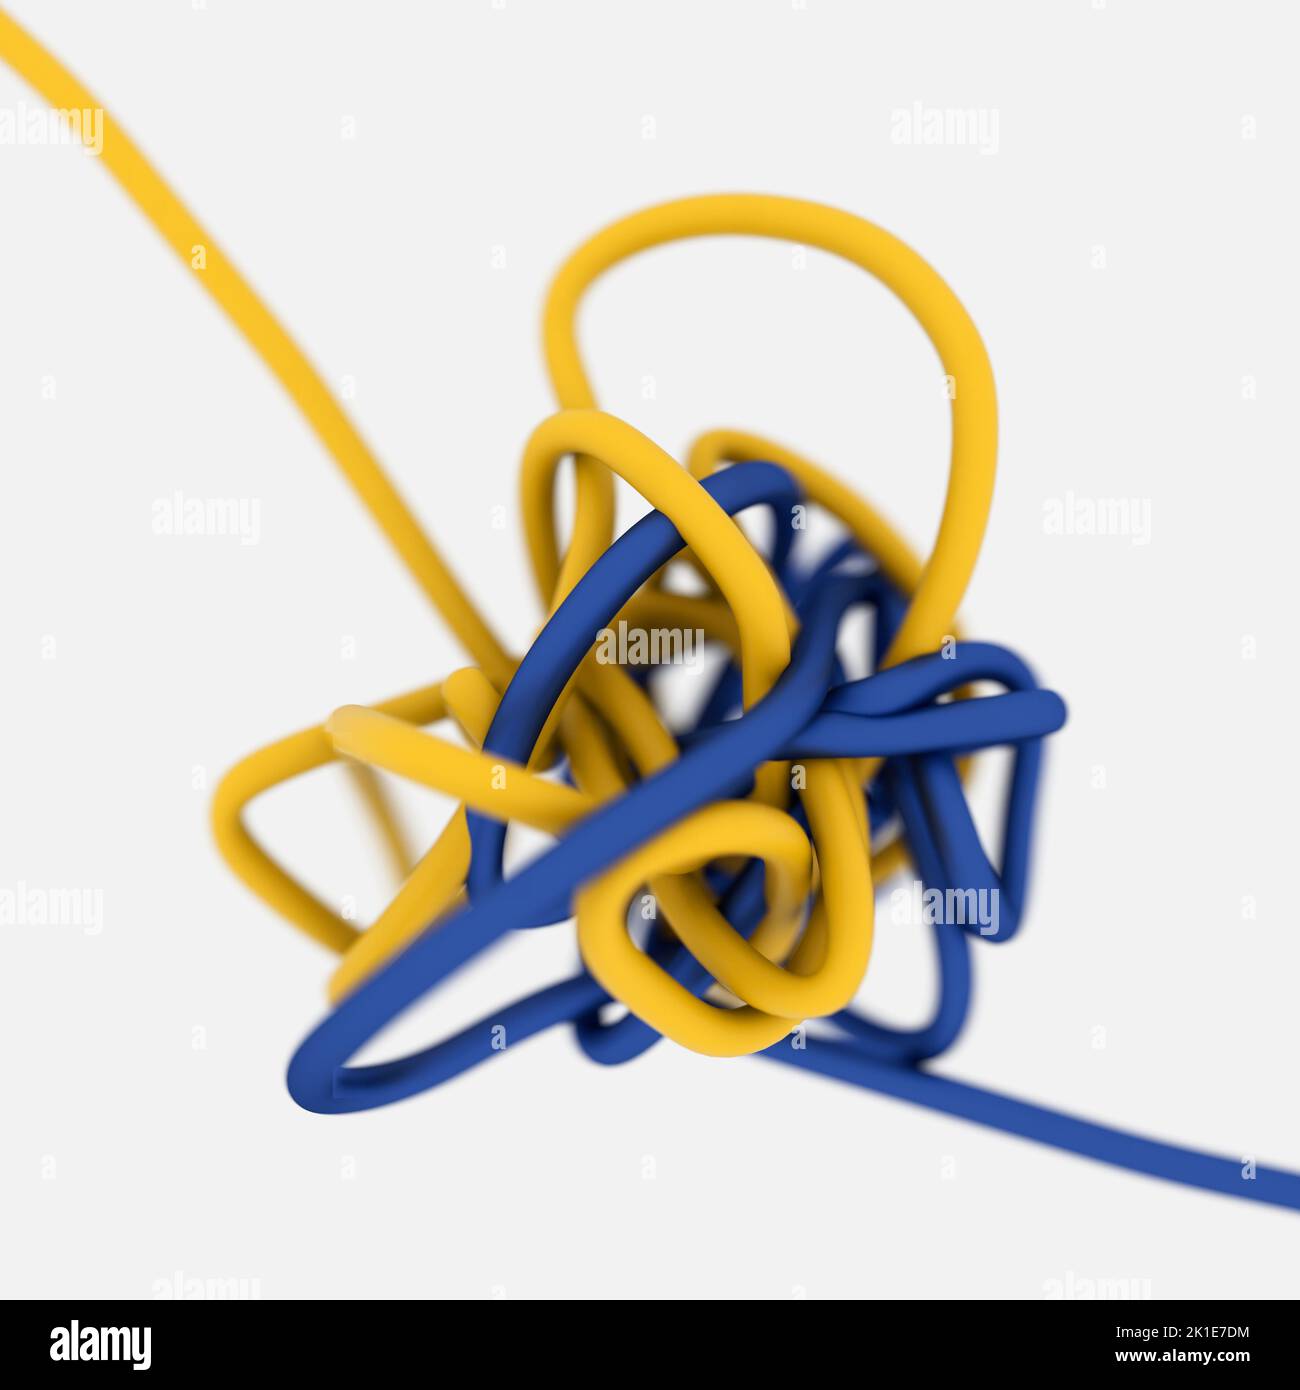 3D-Illustration of blue and yellow wires tangled together symbolizing brain on gray background Stock Photo